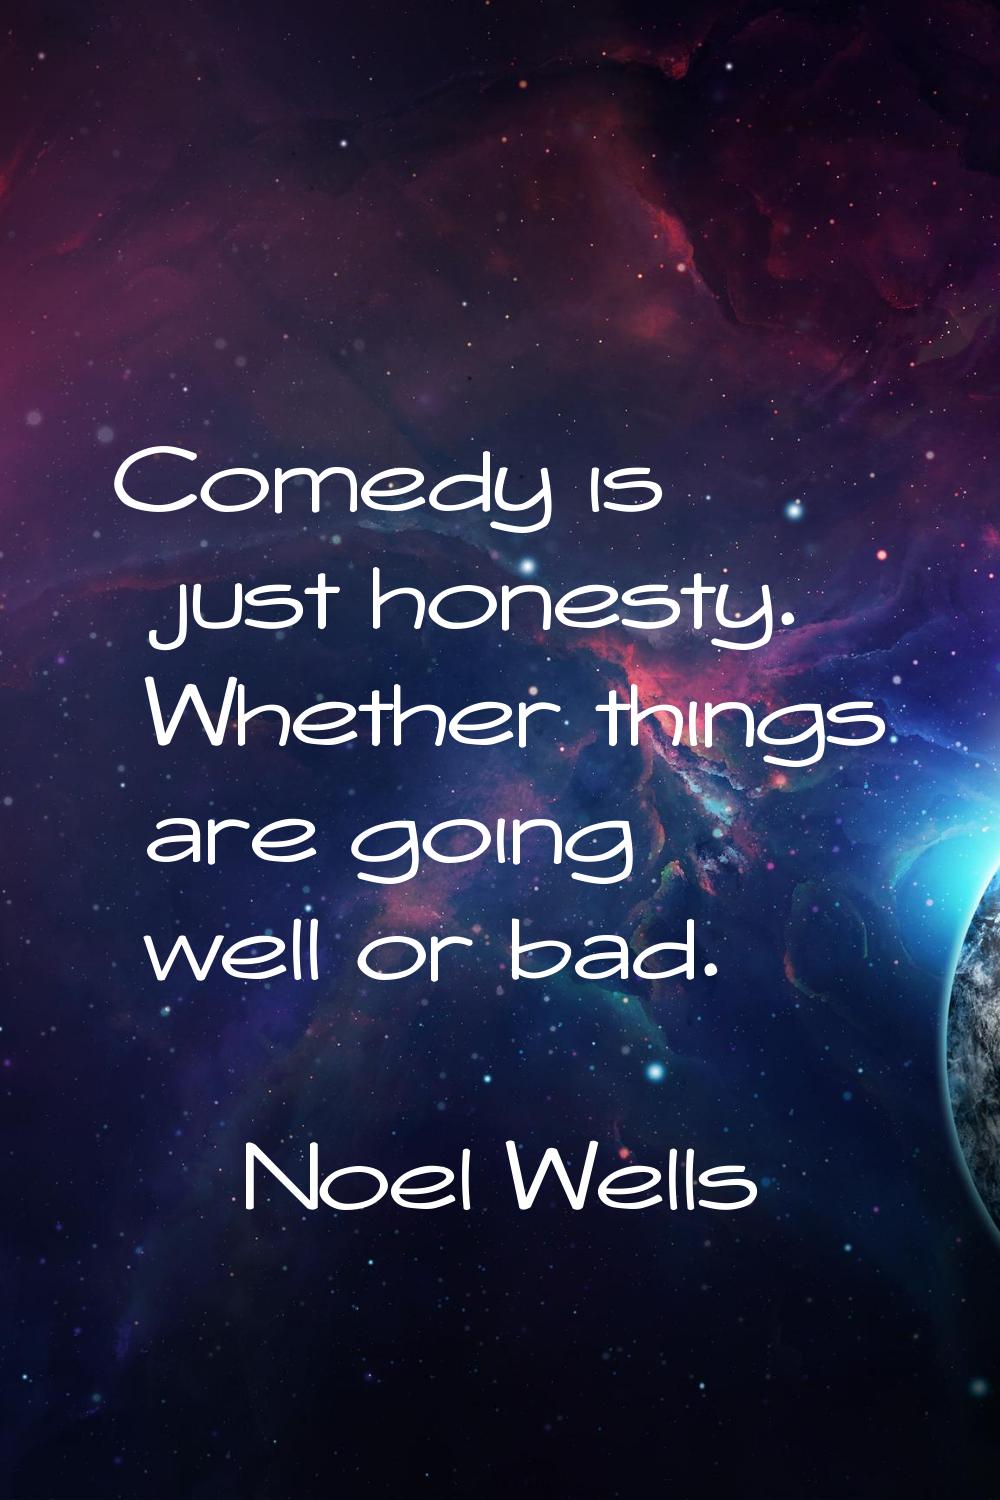 Comedy is just honesty. Whether things are going well or bad.